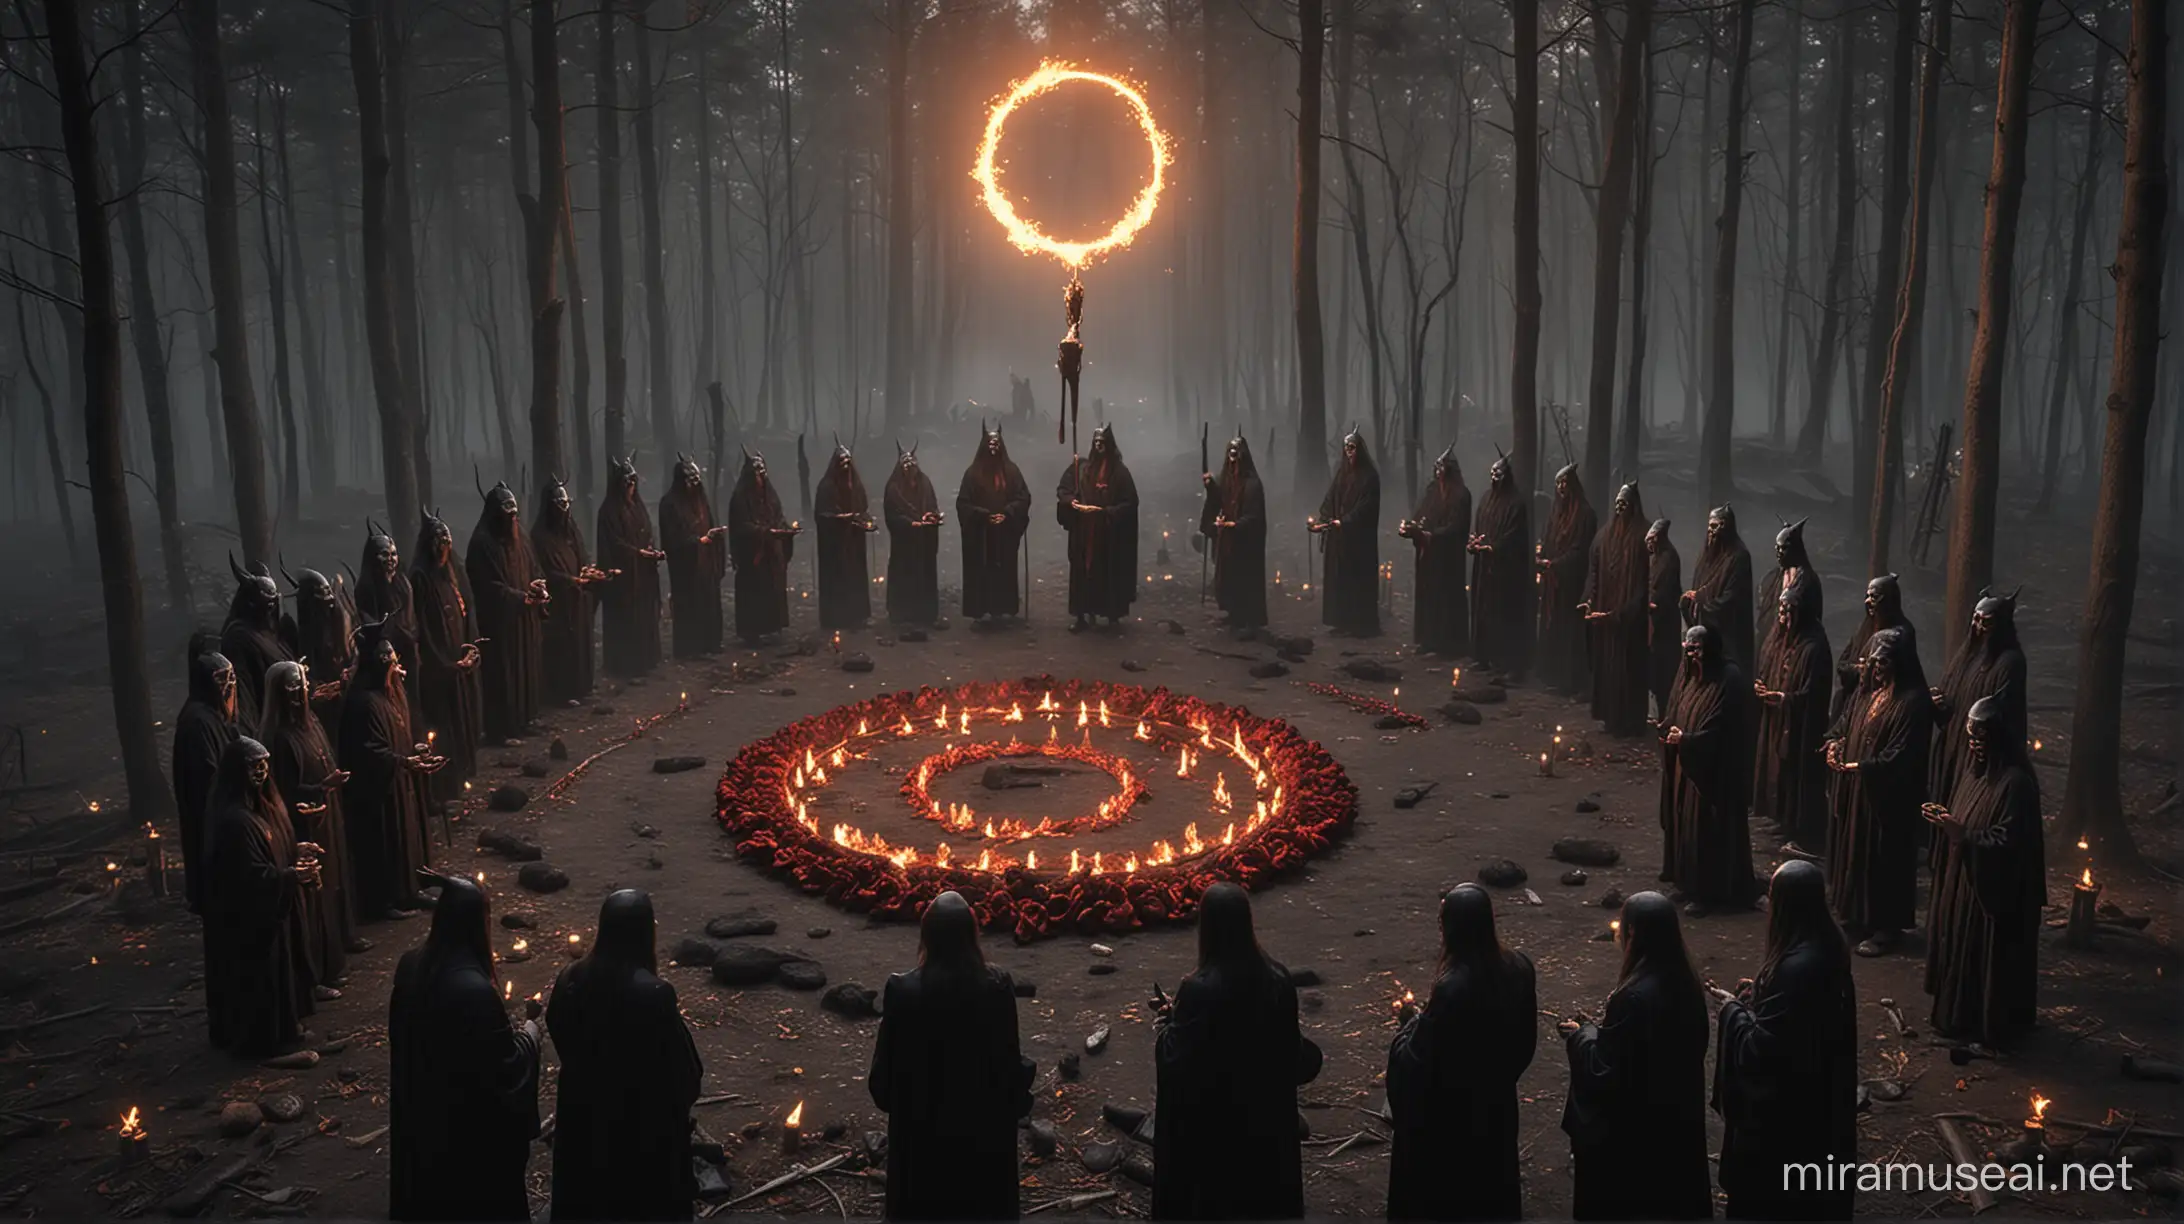 Dark Ritual Satanic Cult Gathering in Forest During Solar Eclipse